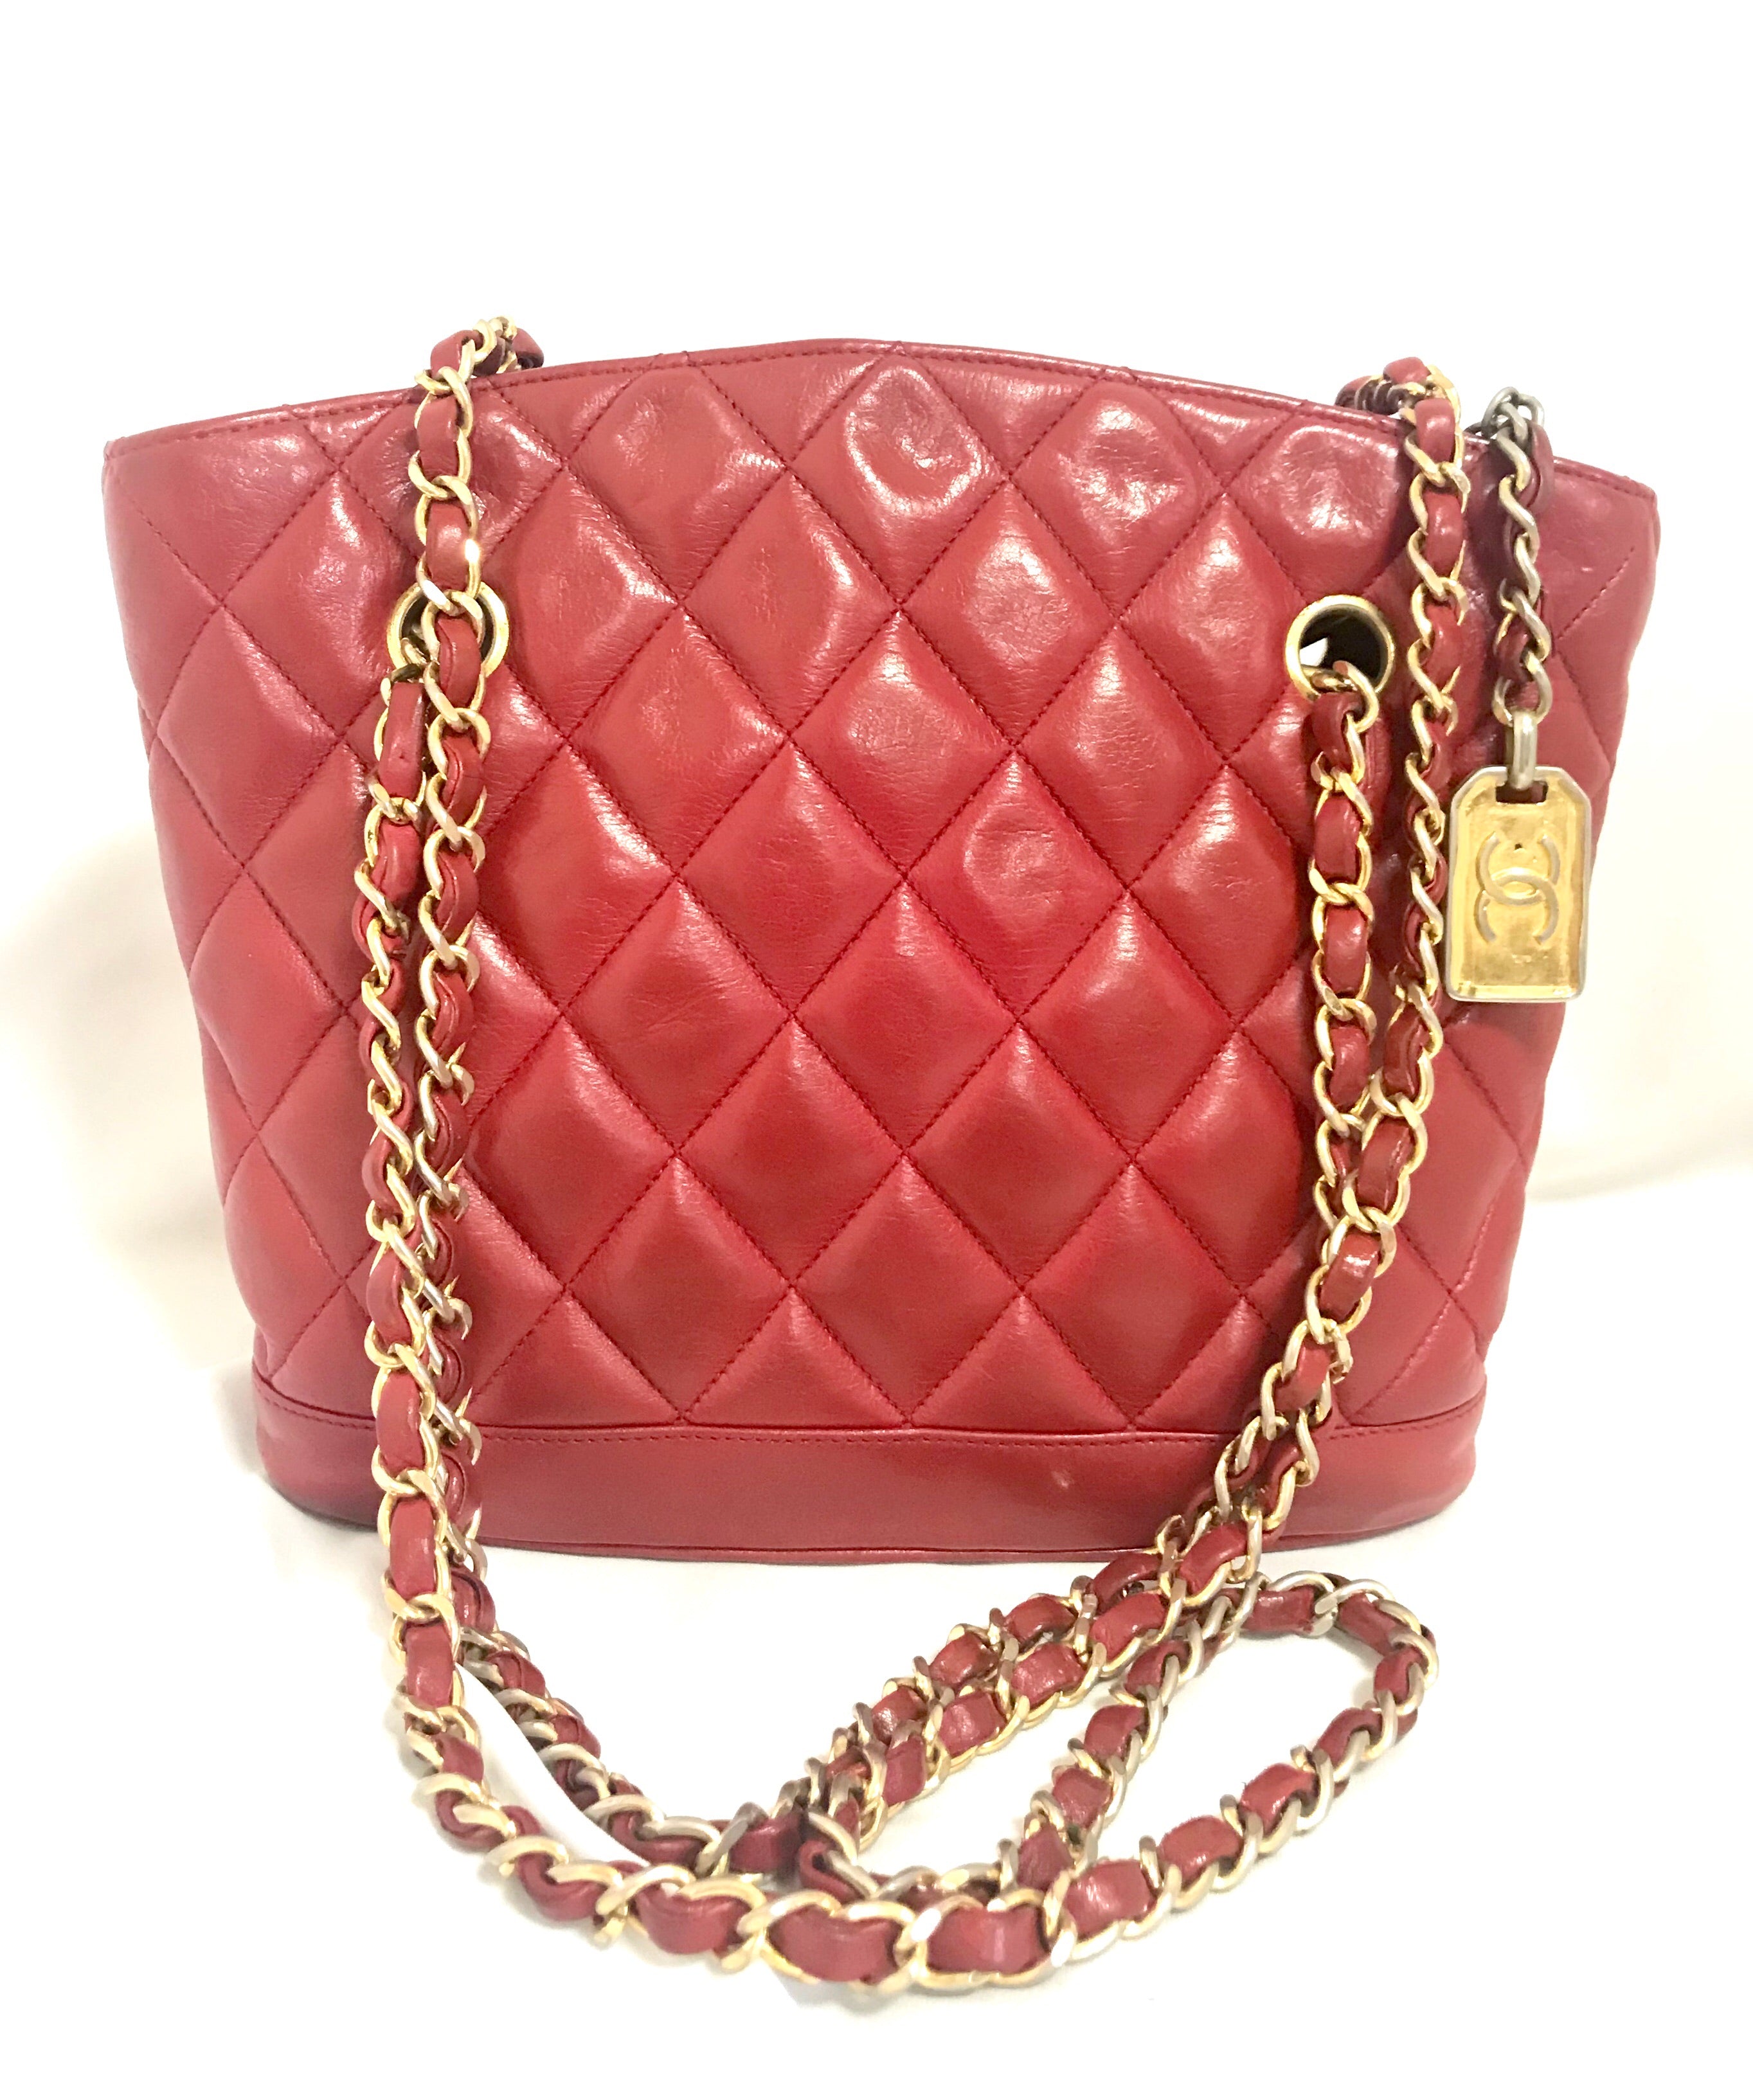 Chanel Vintage Mademoiselle Lock Trapezoid Flap Bag Quilted Lambskin Medium  - ShopStyle